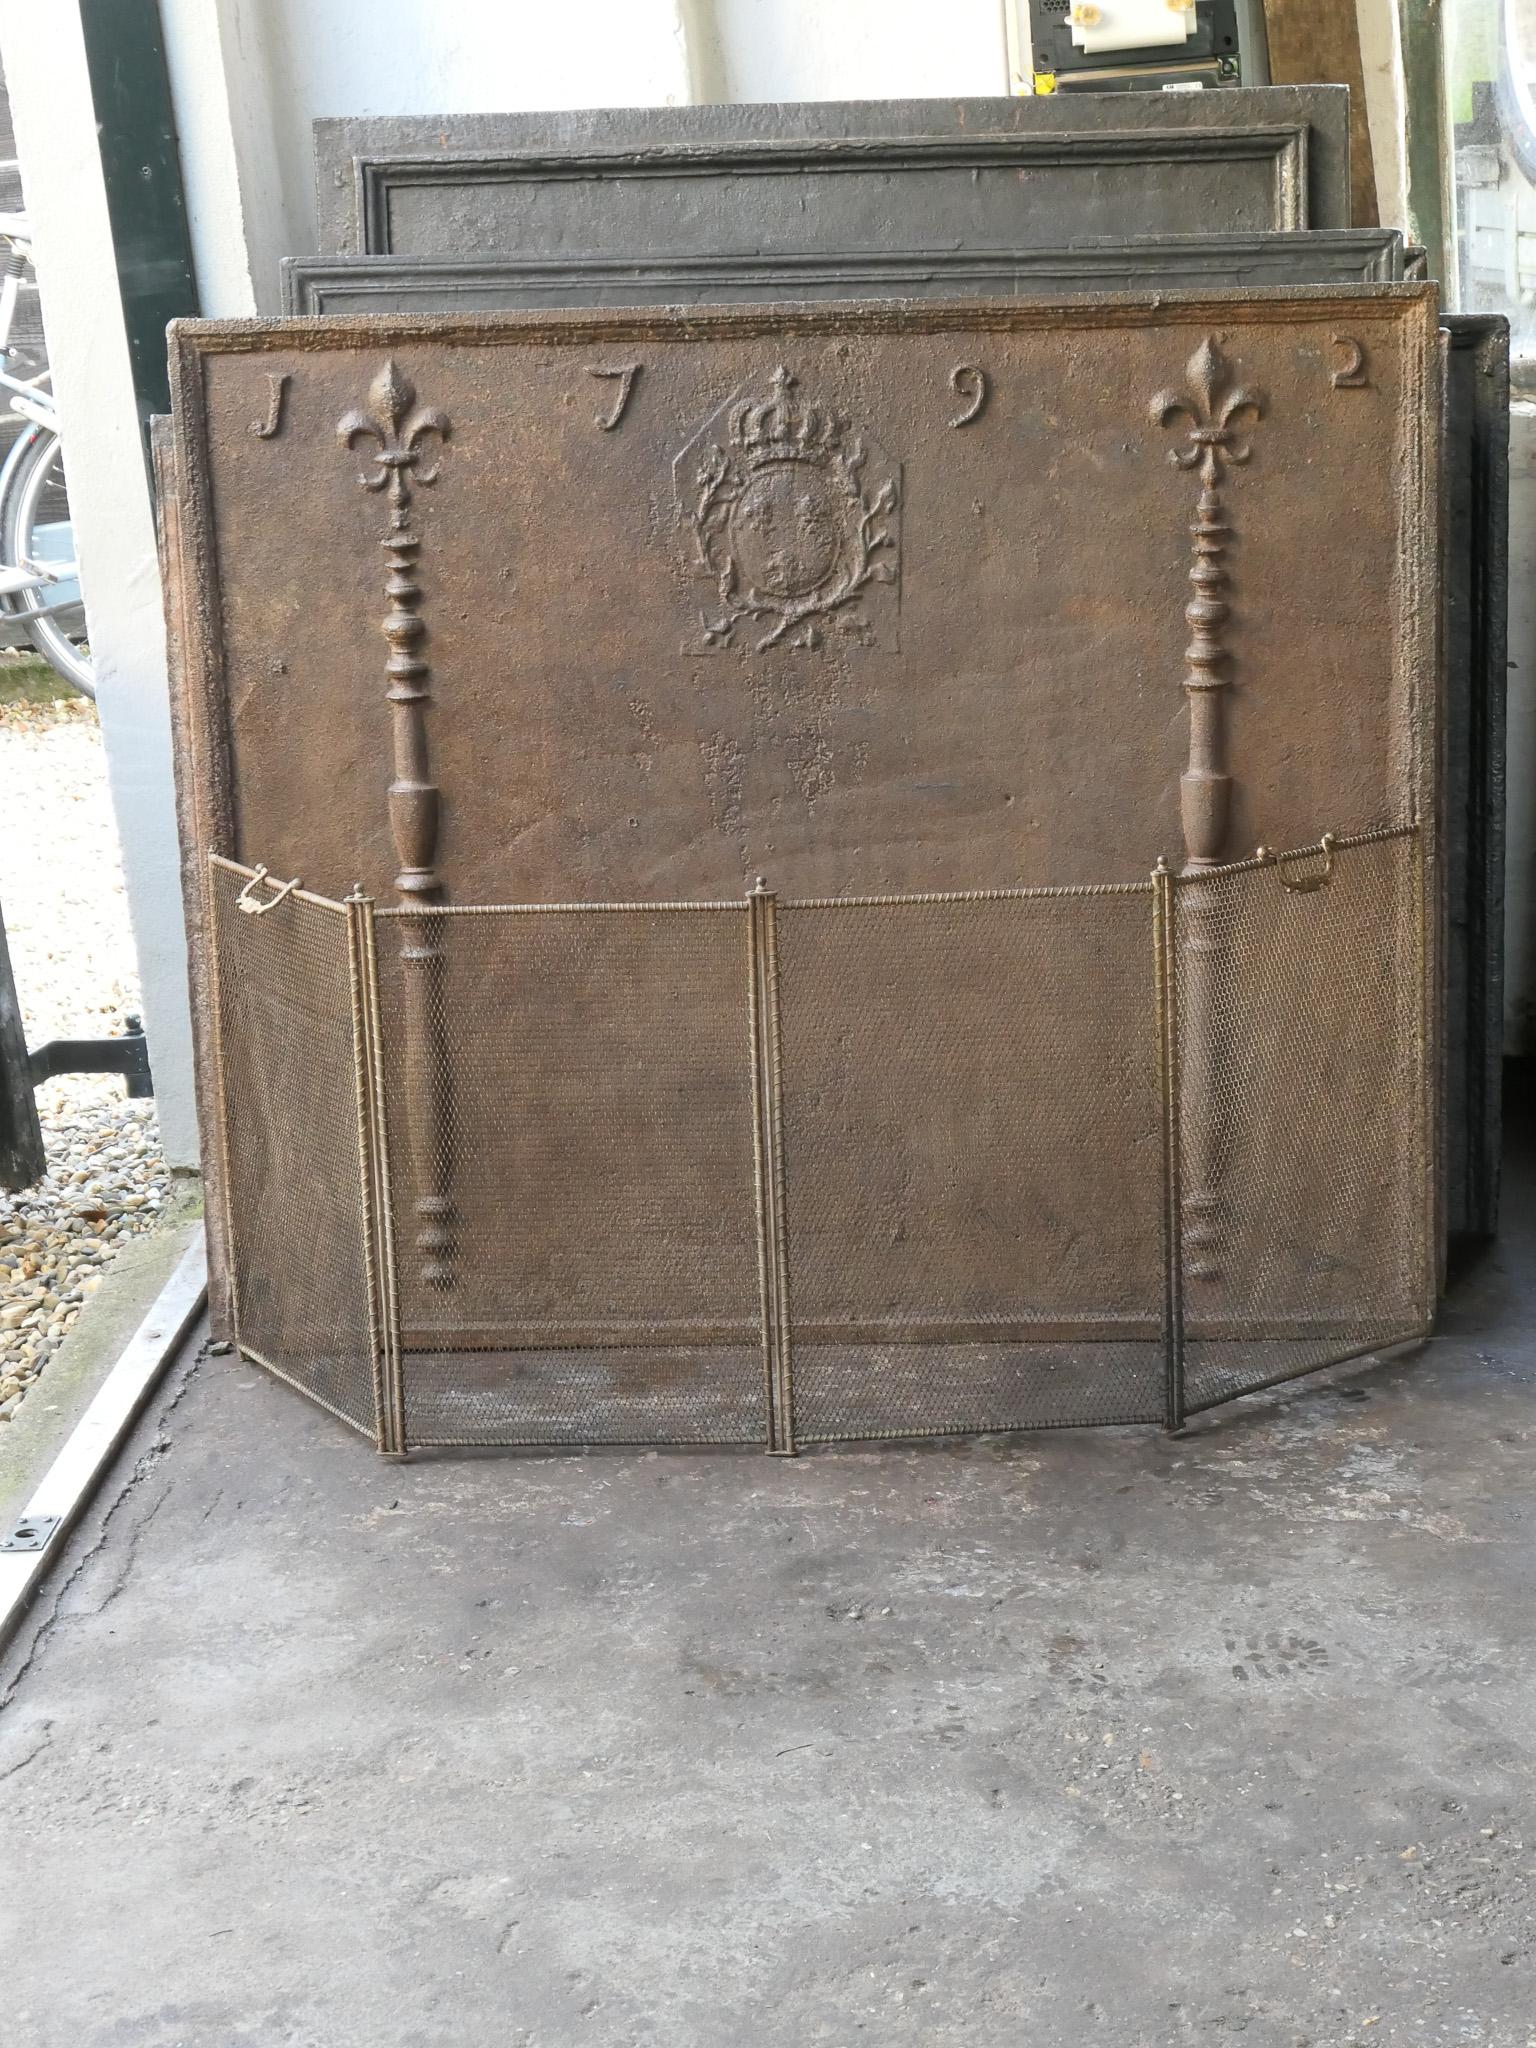 19th century French Napoleon III 4-panel fireplace screen. The screen is made of brass, iron and iron mesh. It is in a good condition and is fit for use in front of the fireplace.